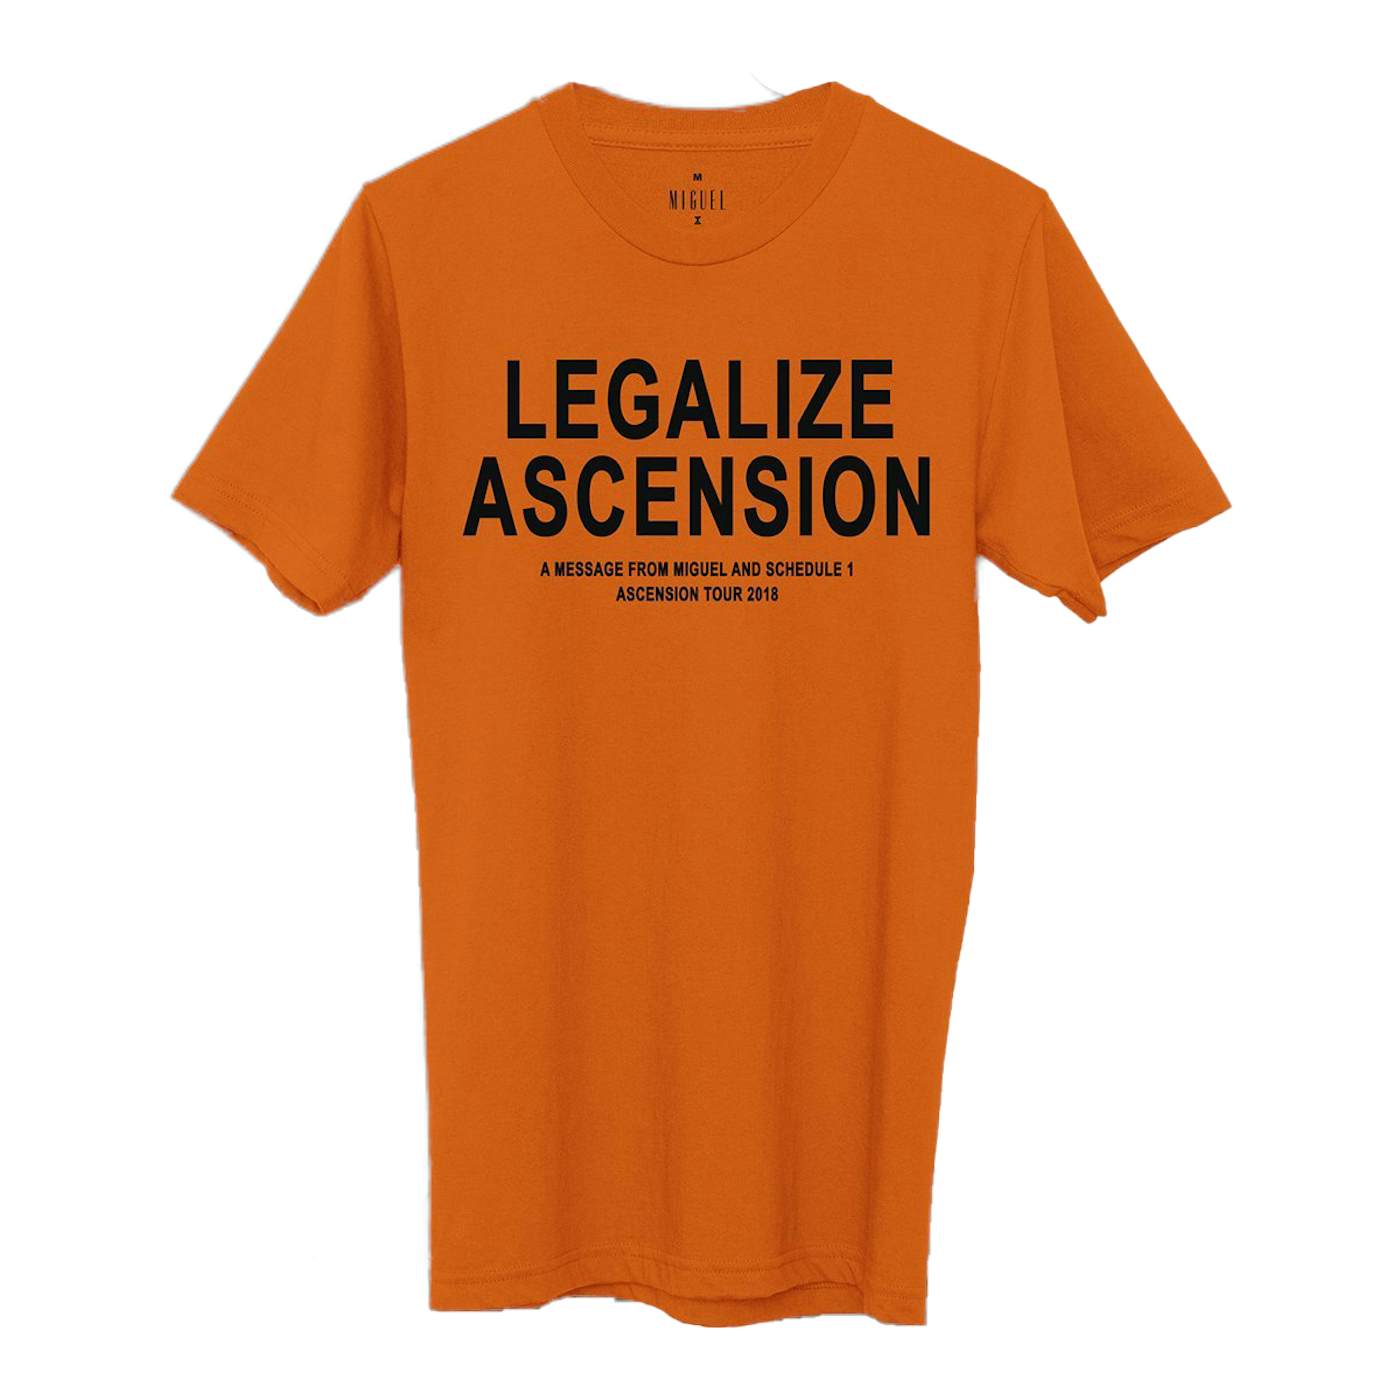 Miguel Legalize Ascension Tee